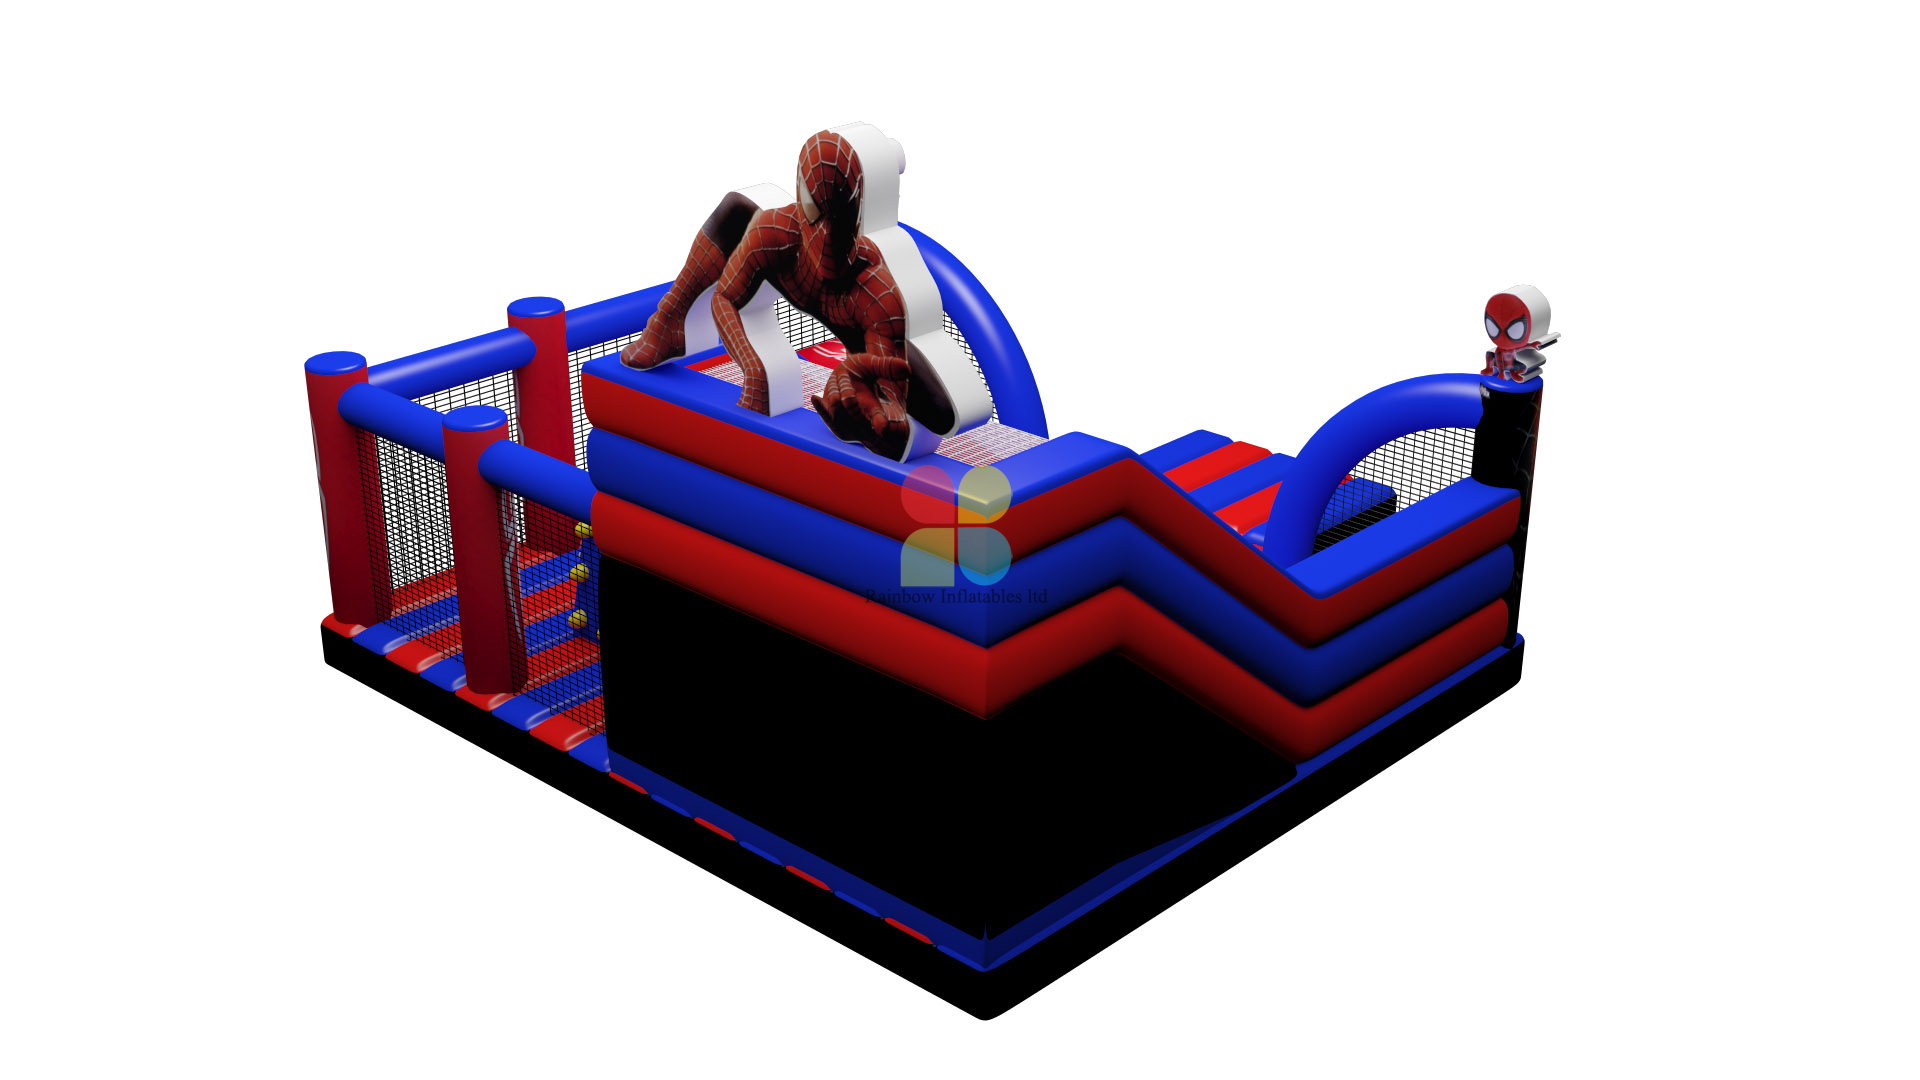 Digital Printing Funny Inflatable Bouncer Spider Man Playground For Rental